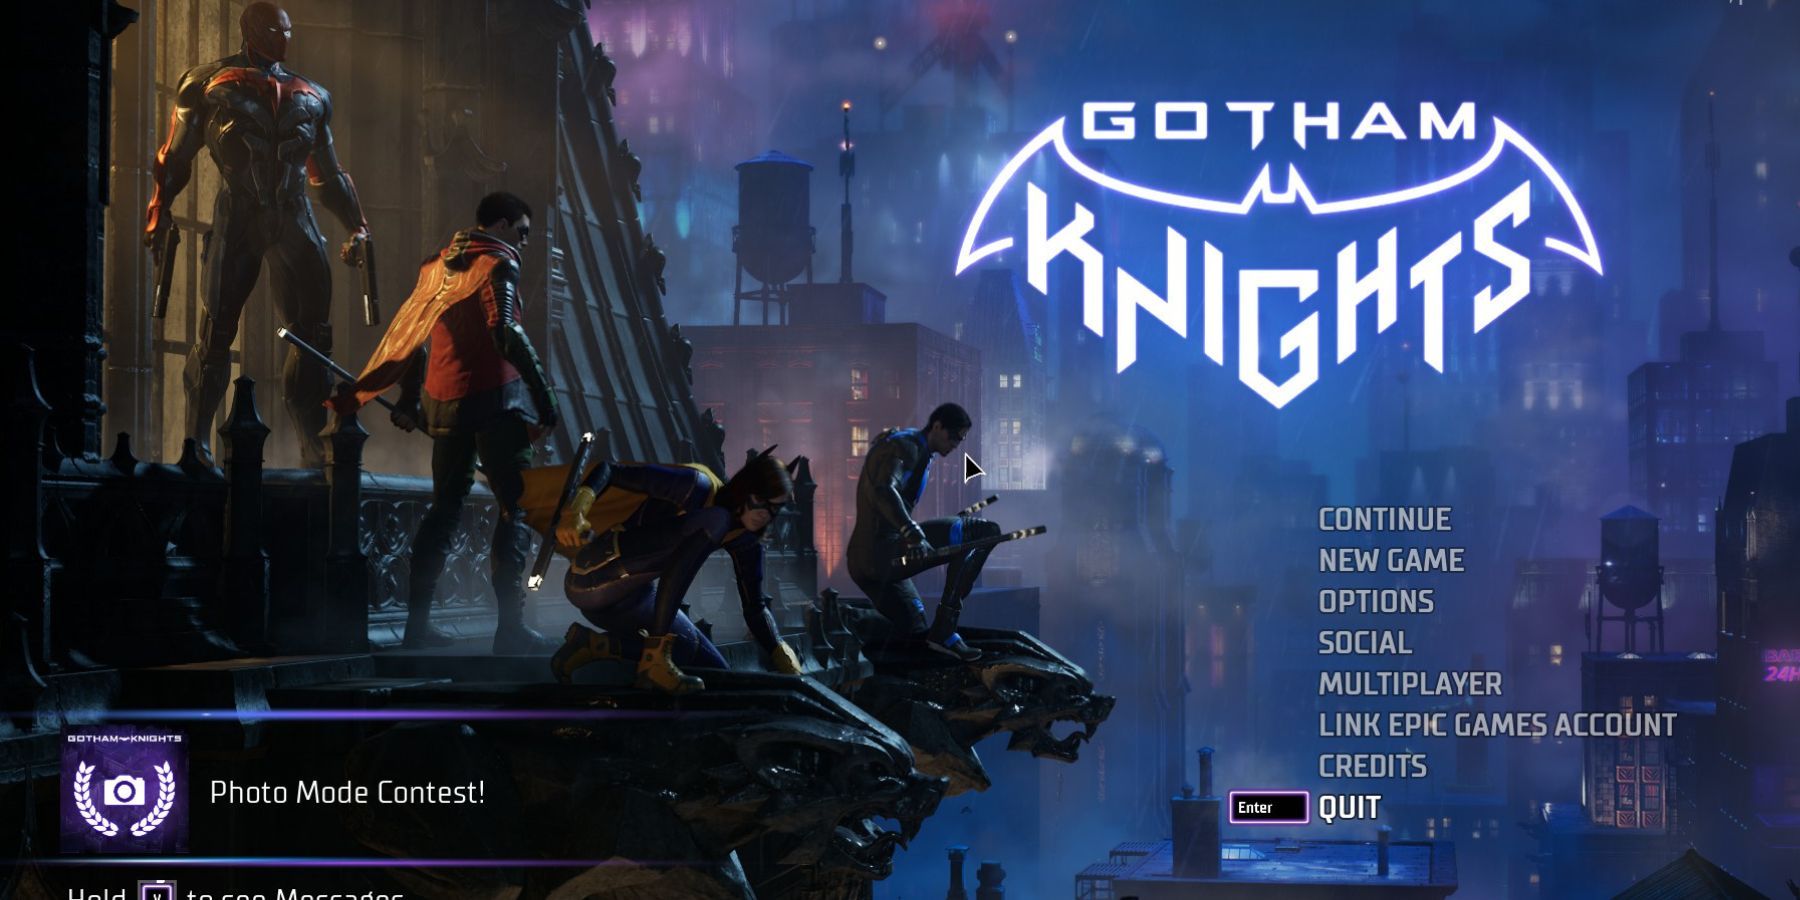 Gotham Knights now on game pass! definitley worth checking out #xboxga